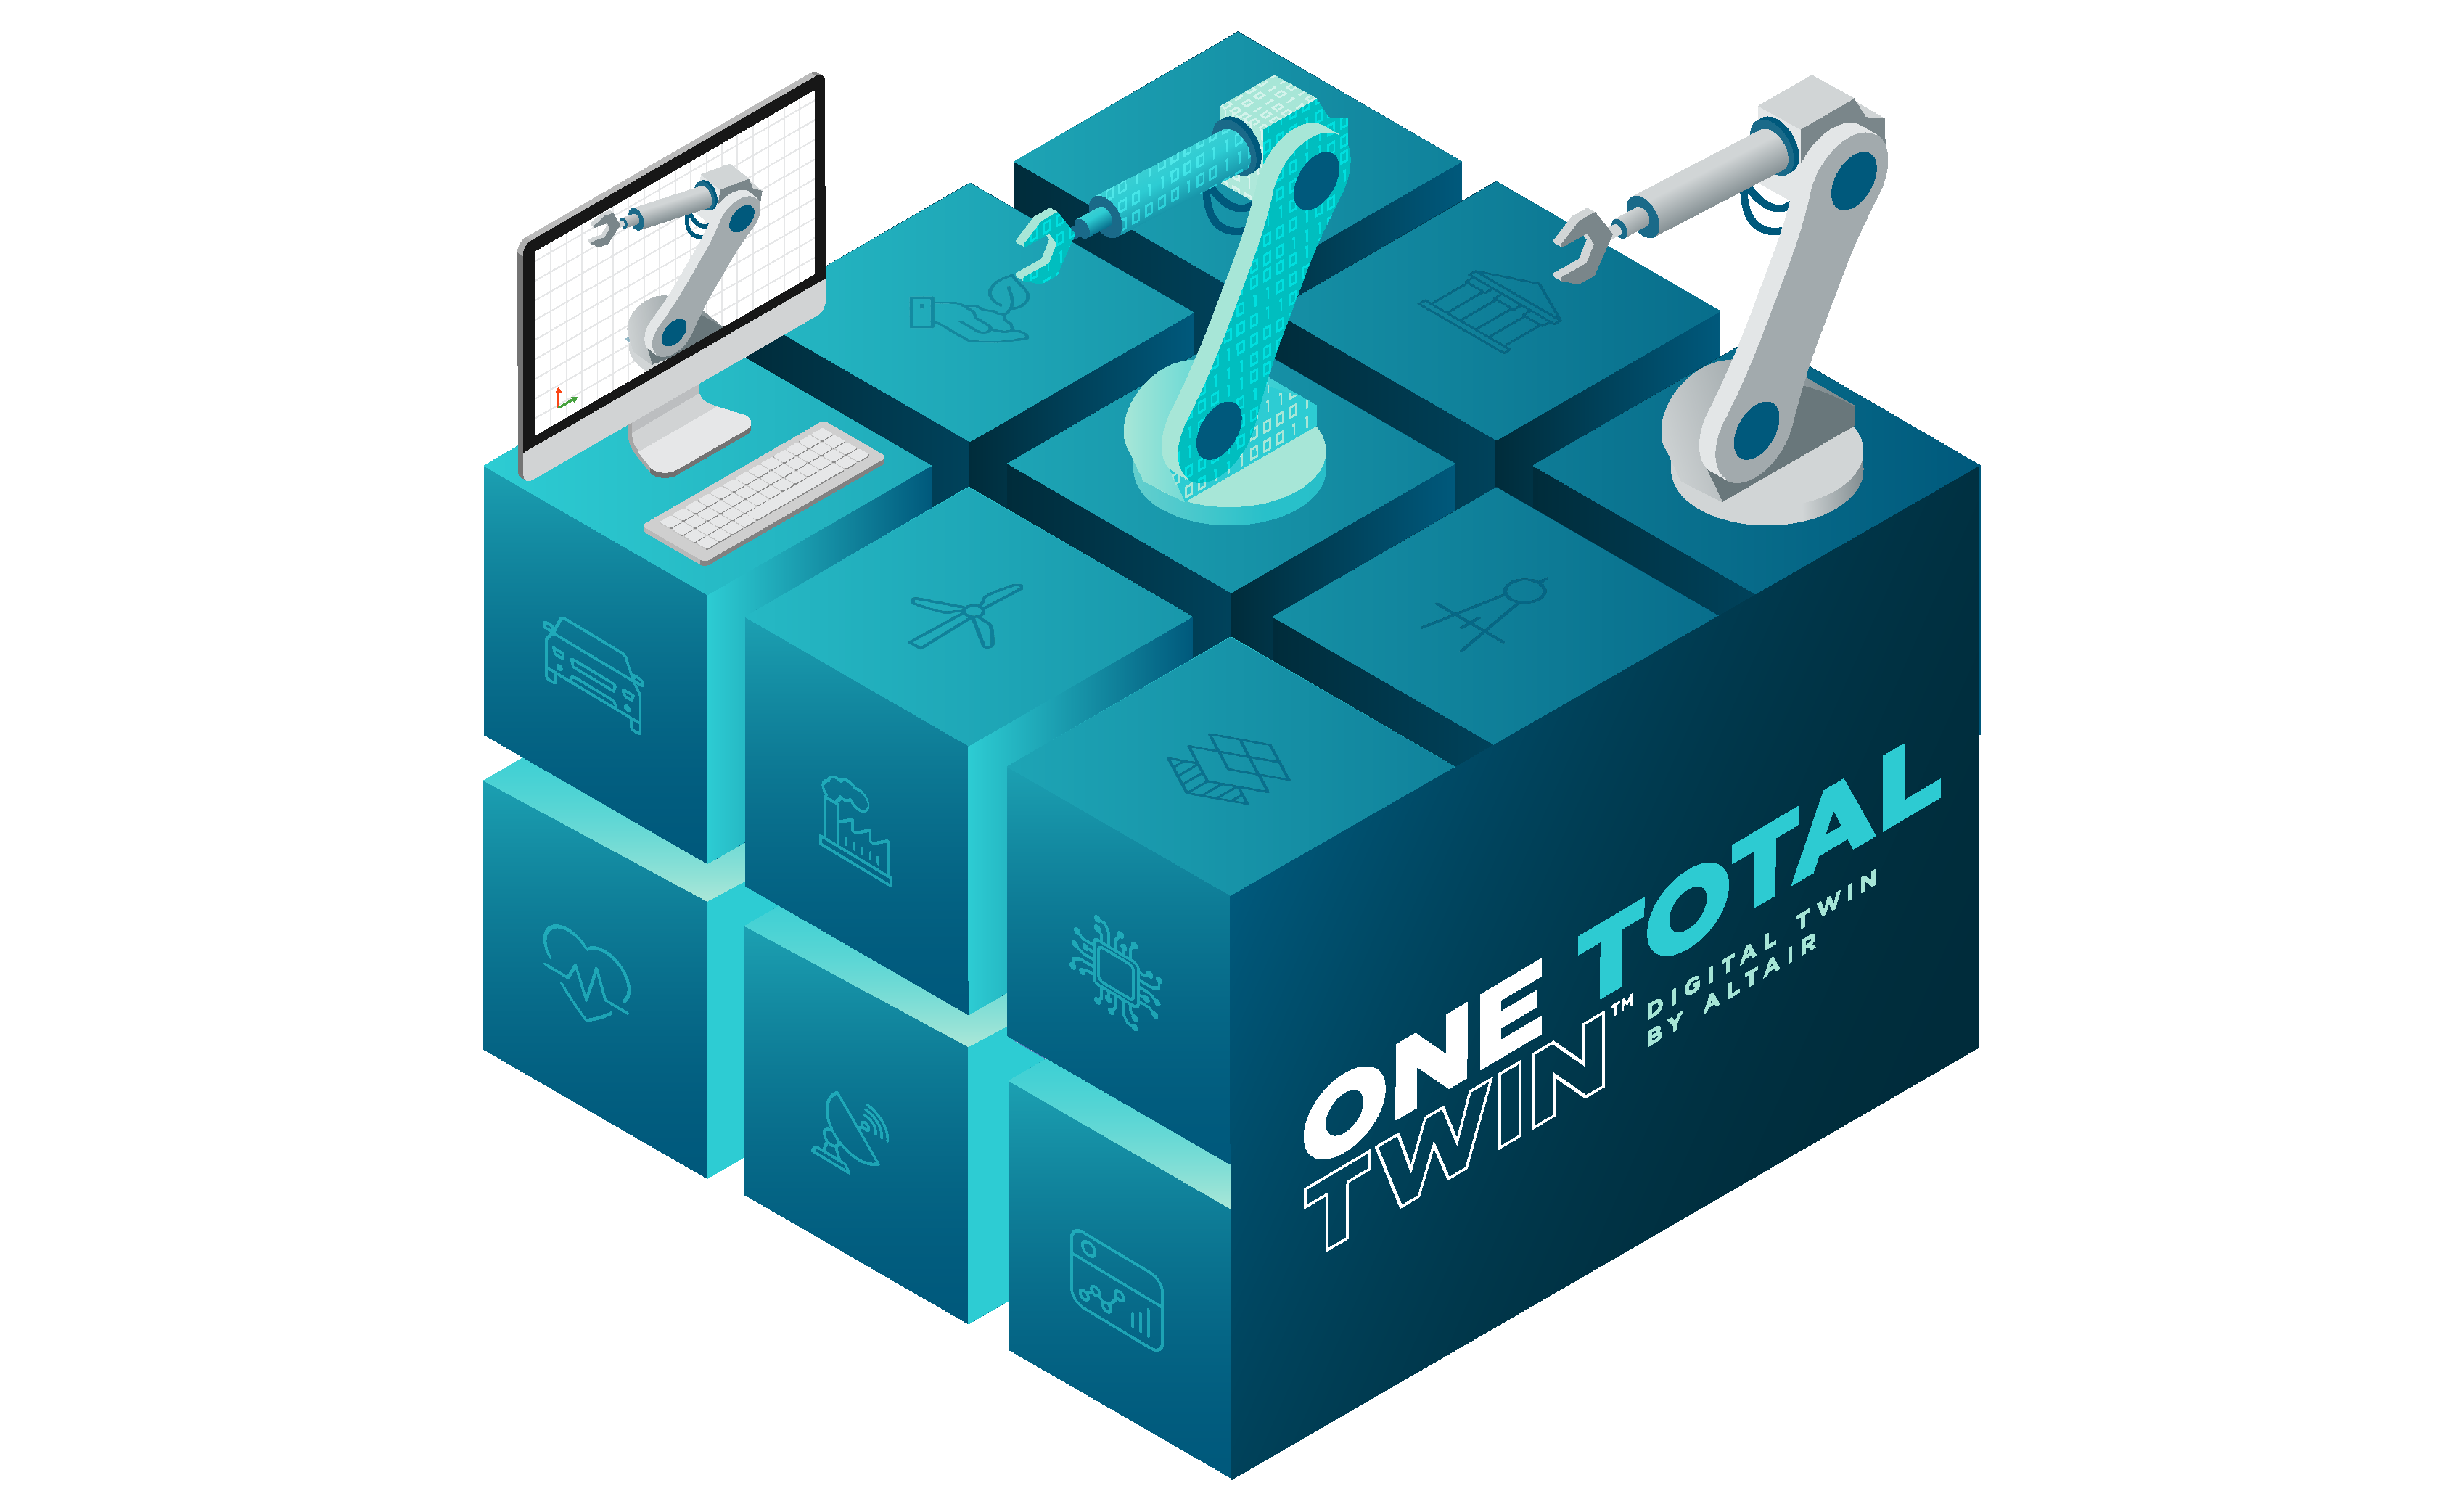 One Total Twin - Digital Twin Technology by Altair